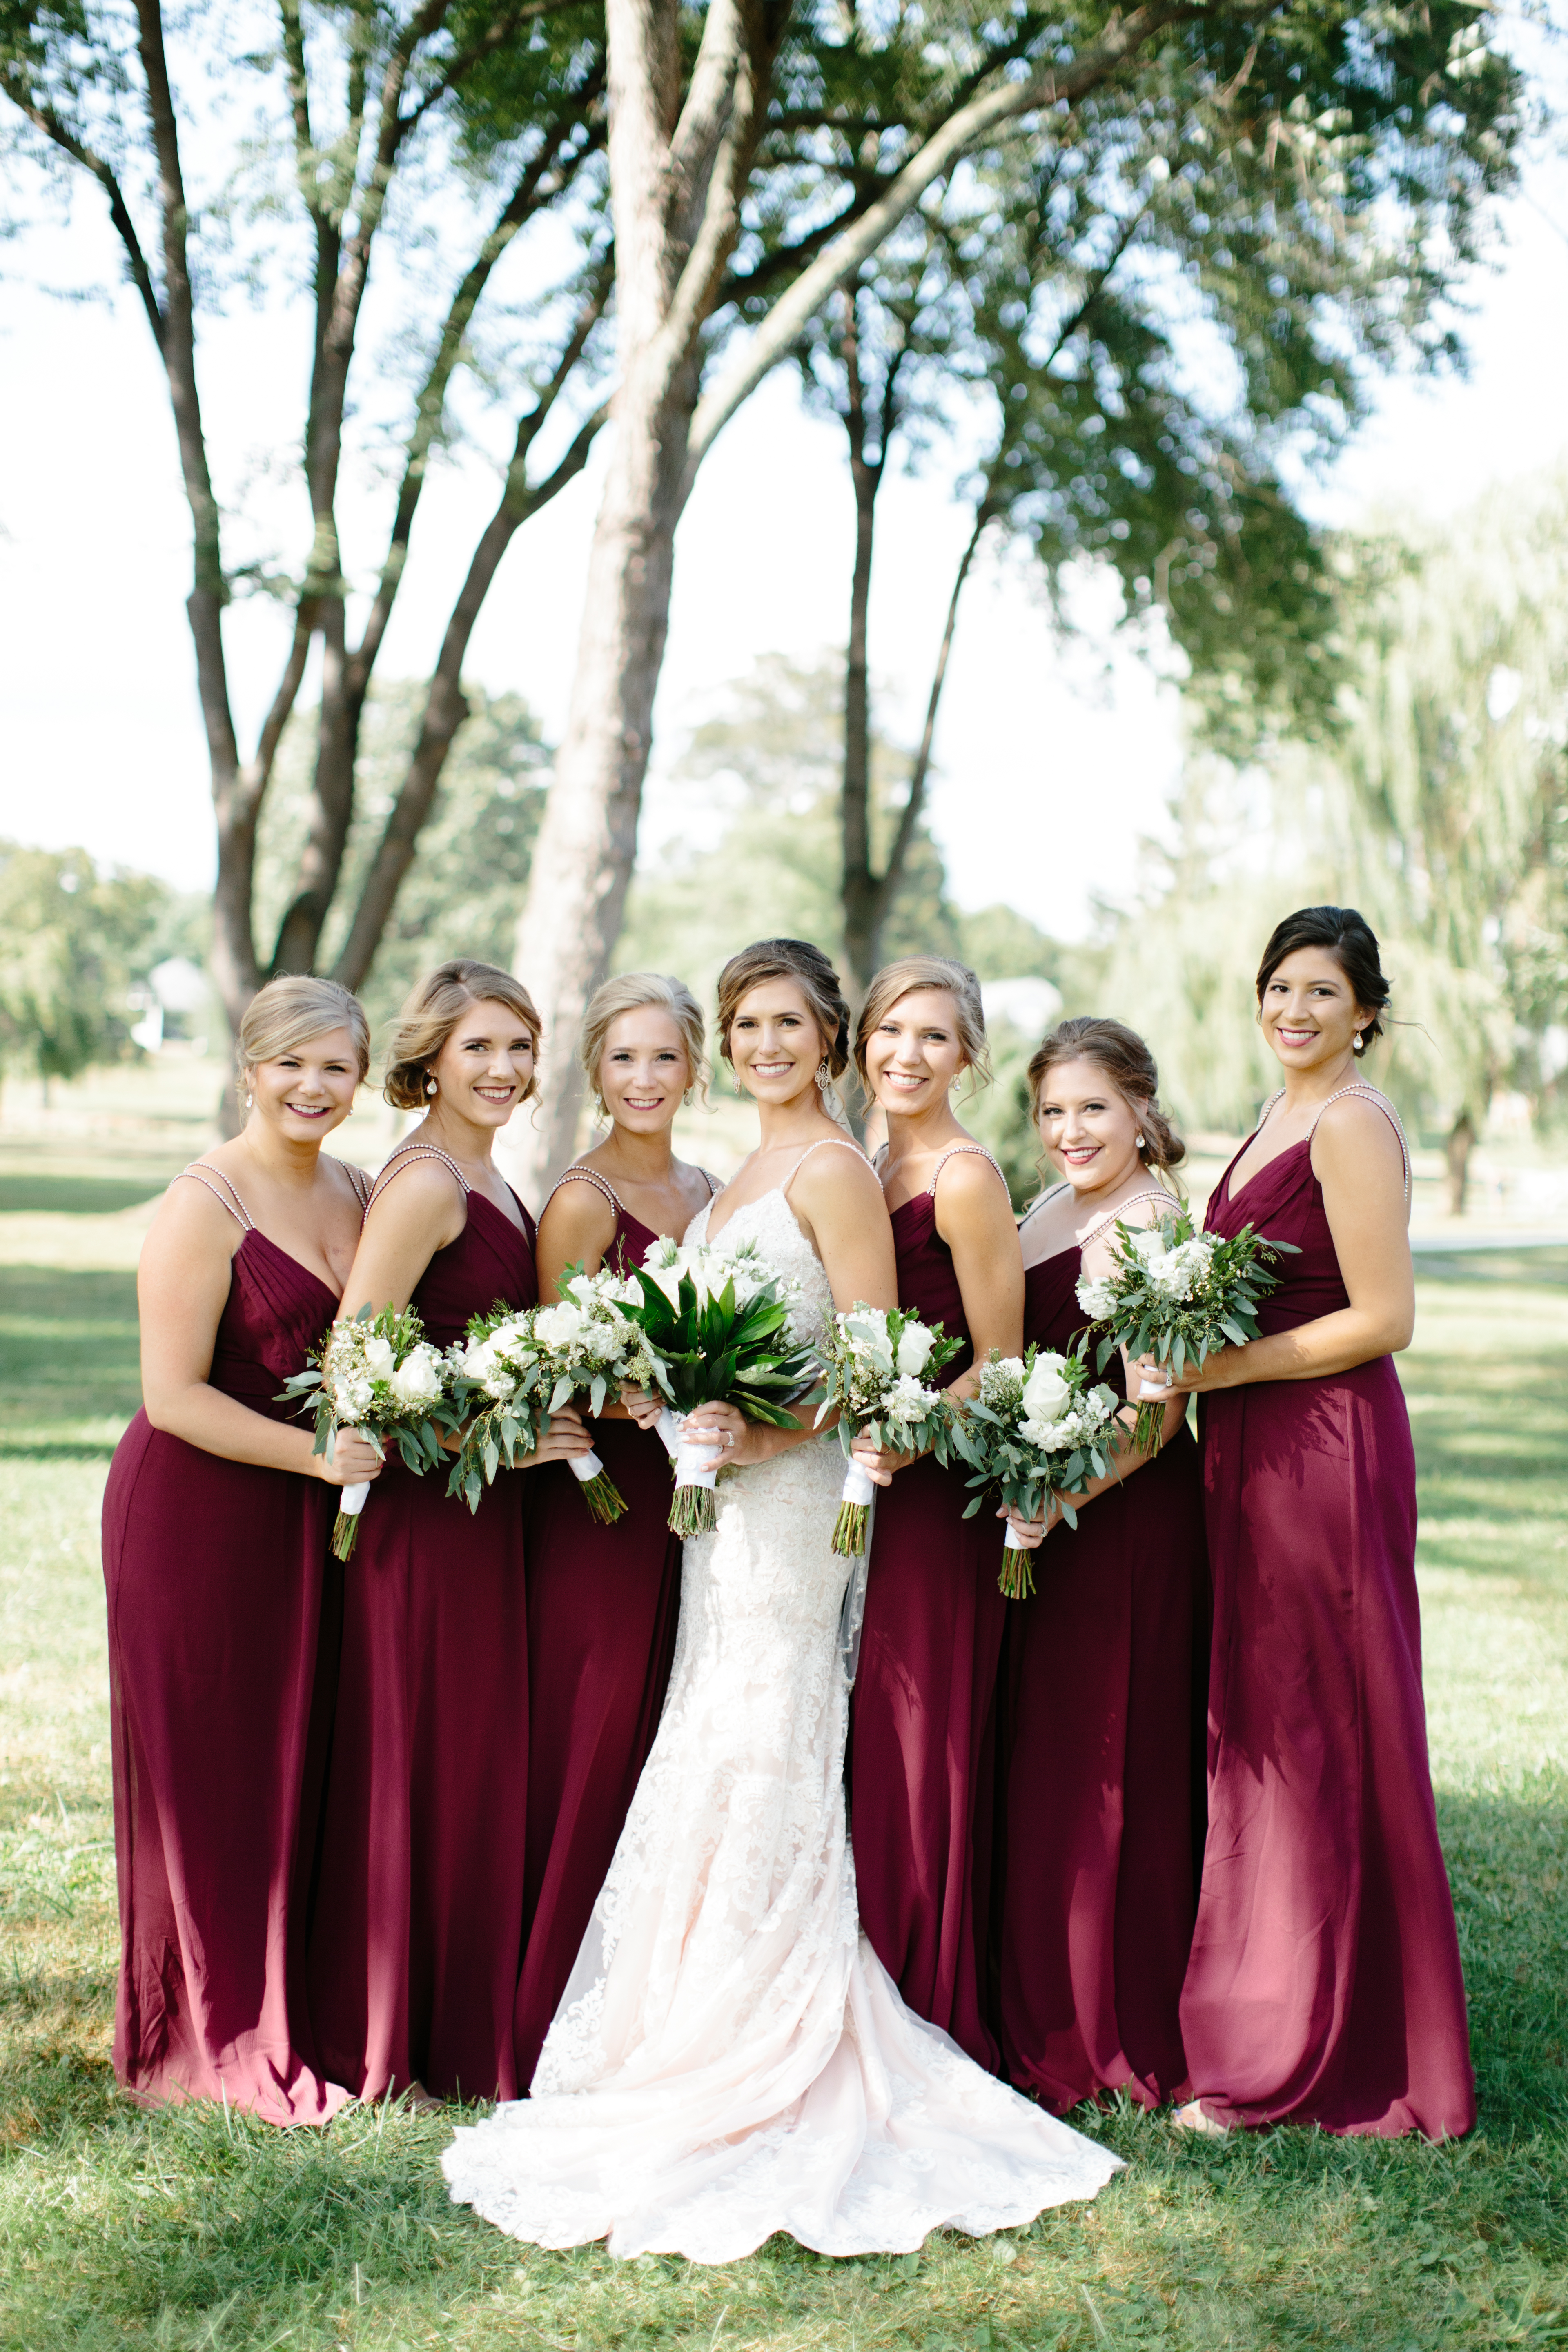 Romantic Maroon bridesmaid dresses with green and white bouquets